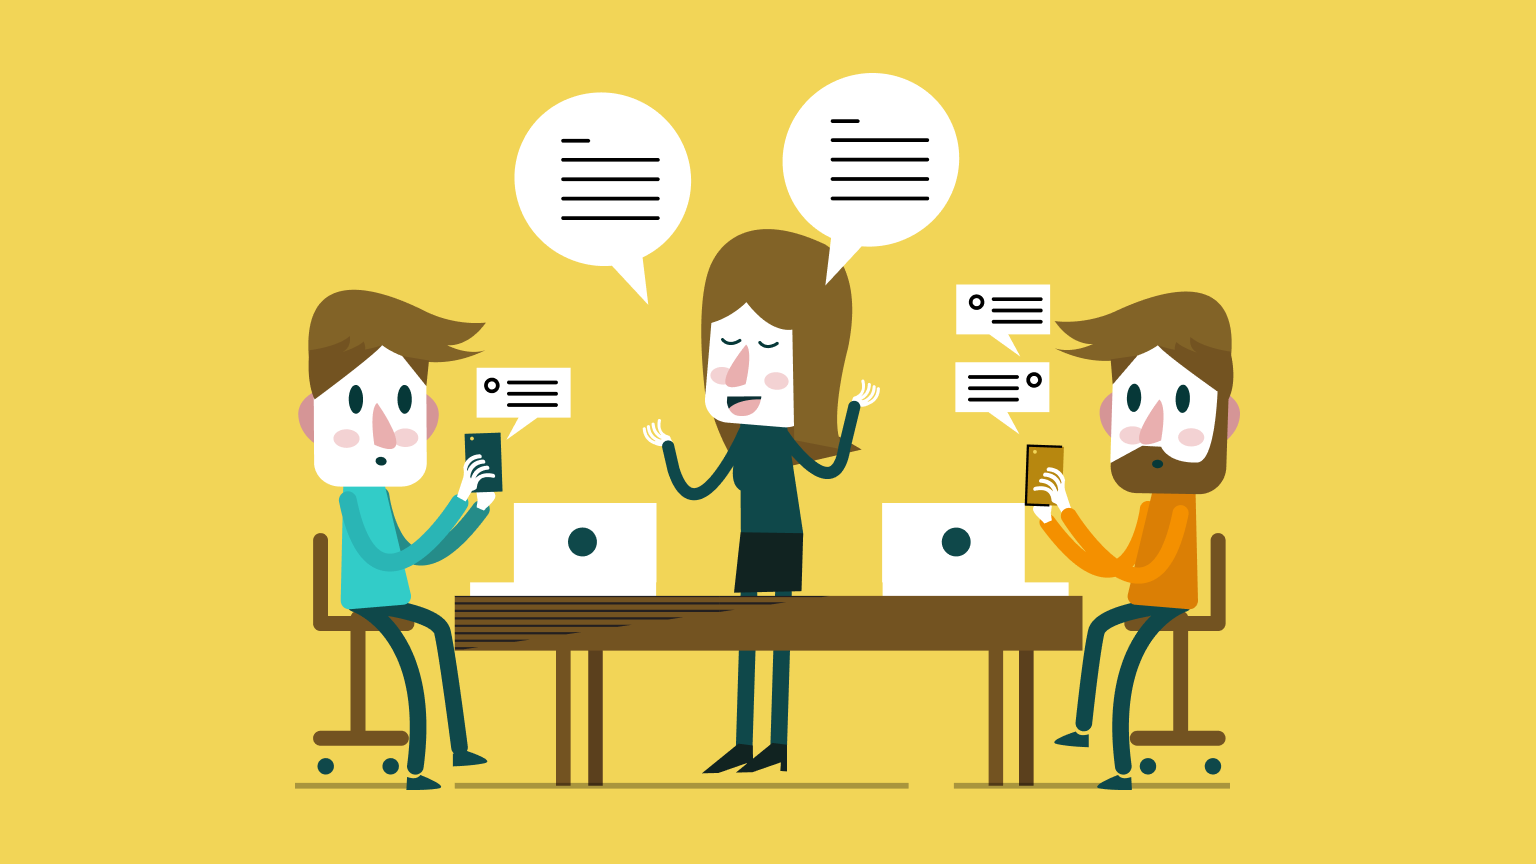 Effective meeting feedback survey questions guide